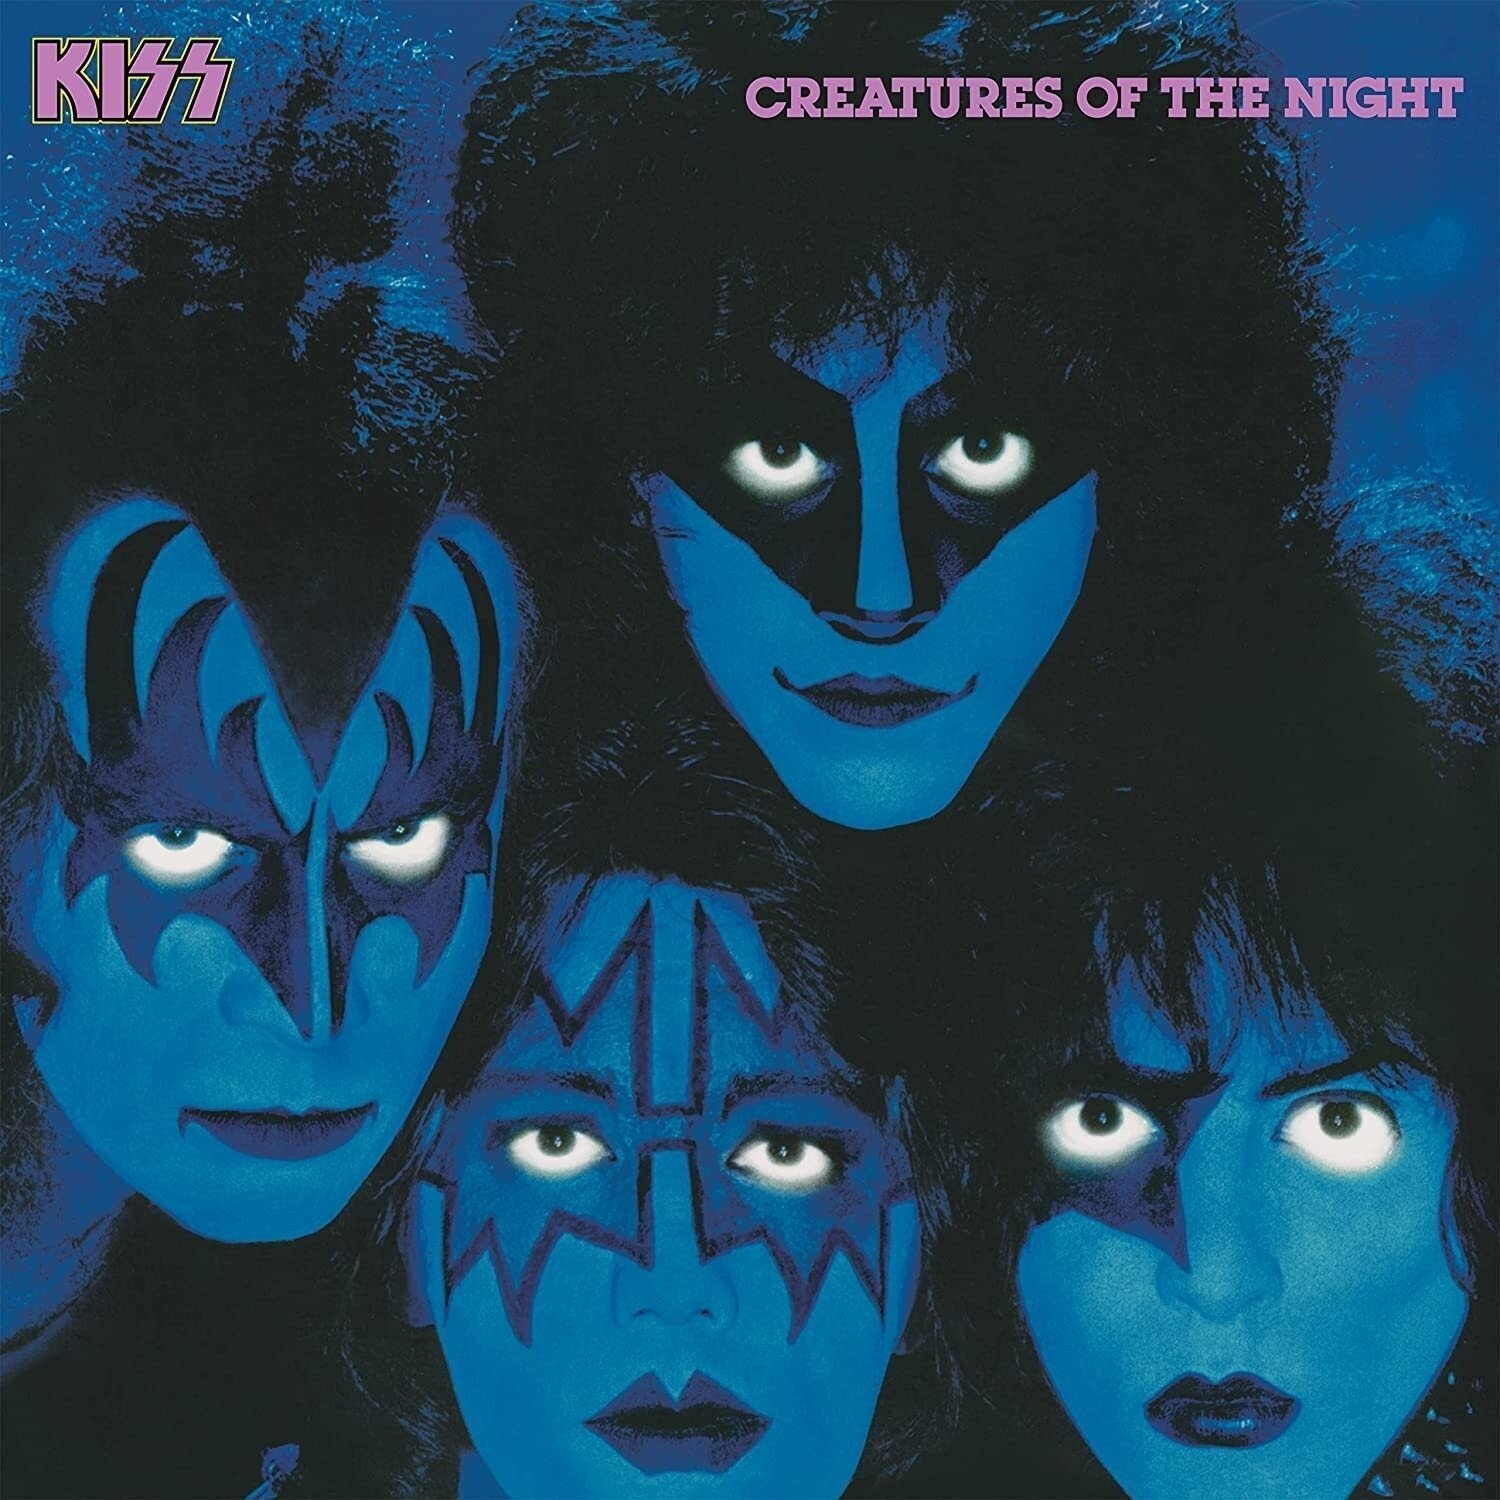 CD musique Kiss - Creatures Of The Night (Remastered) (Reissue) (CD)